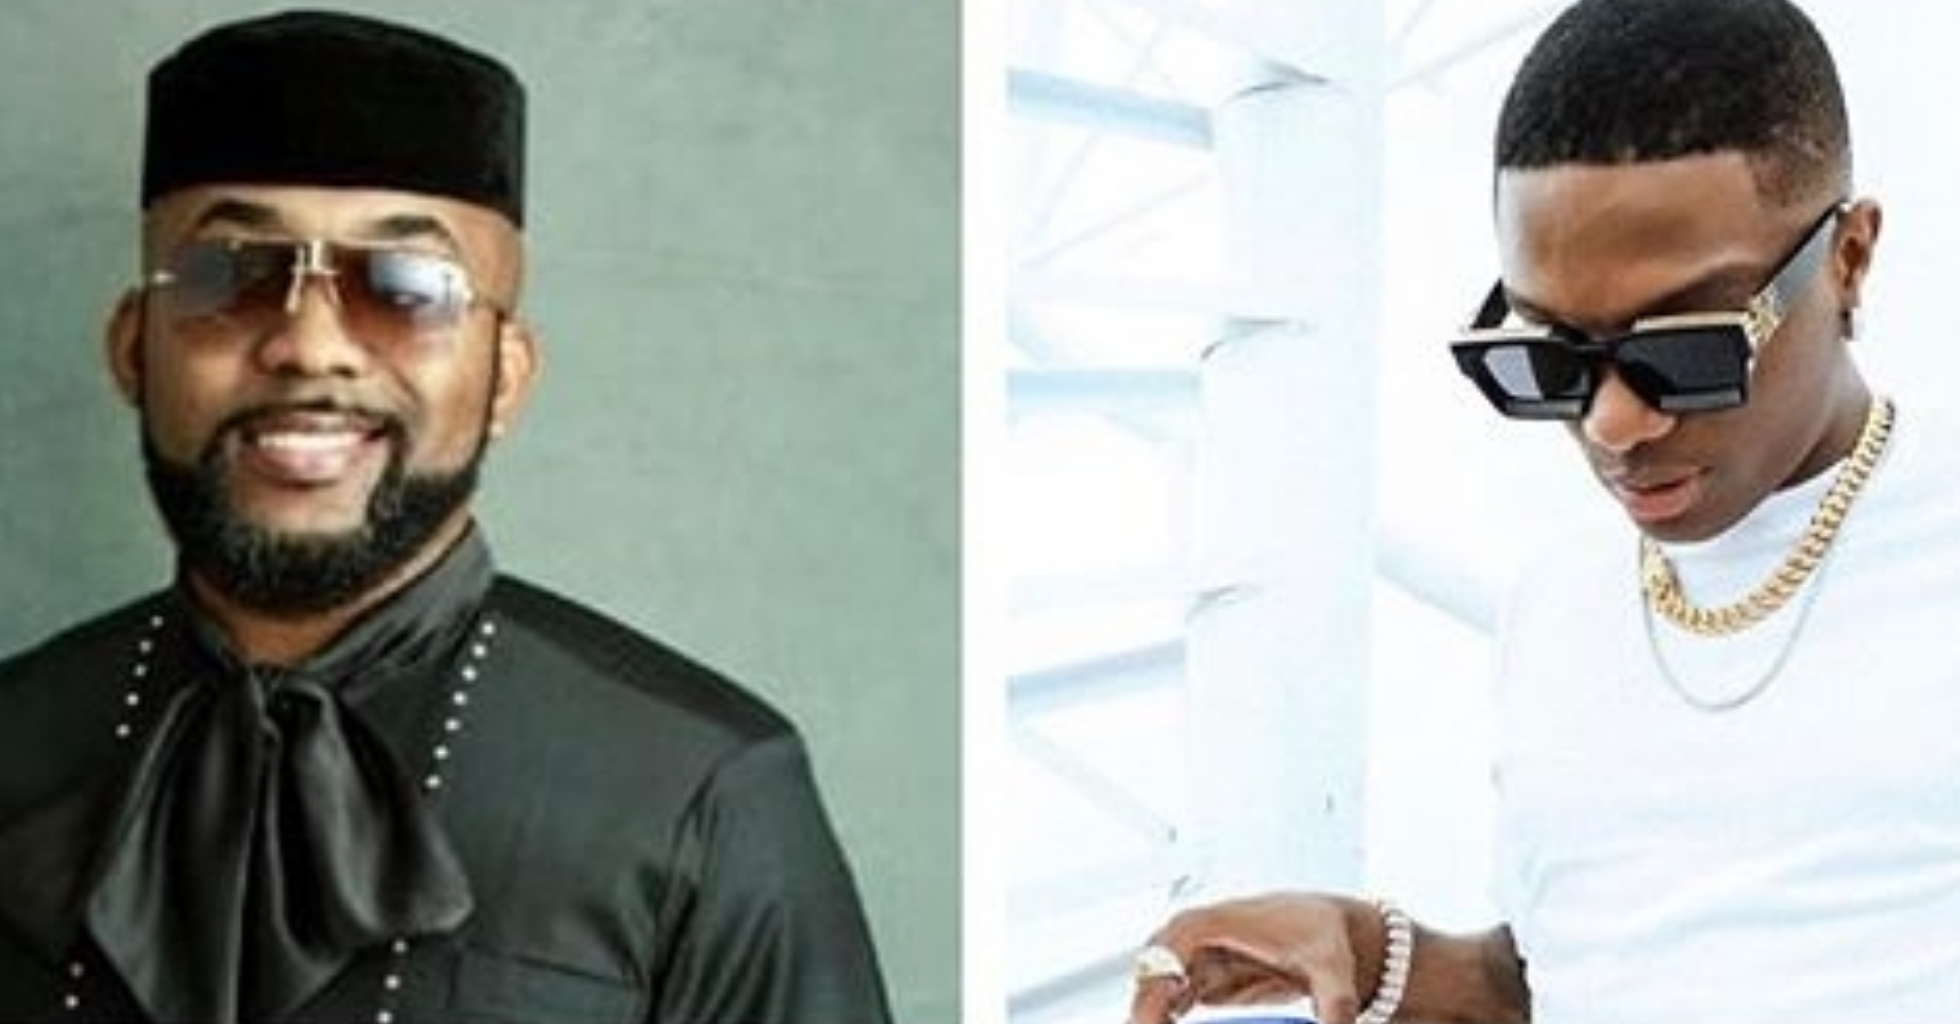 “My name is Wizkid” – Tweet of Wizkid begging Banky W for support 10 years ago surfaces online